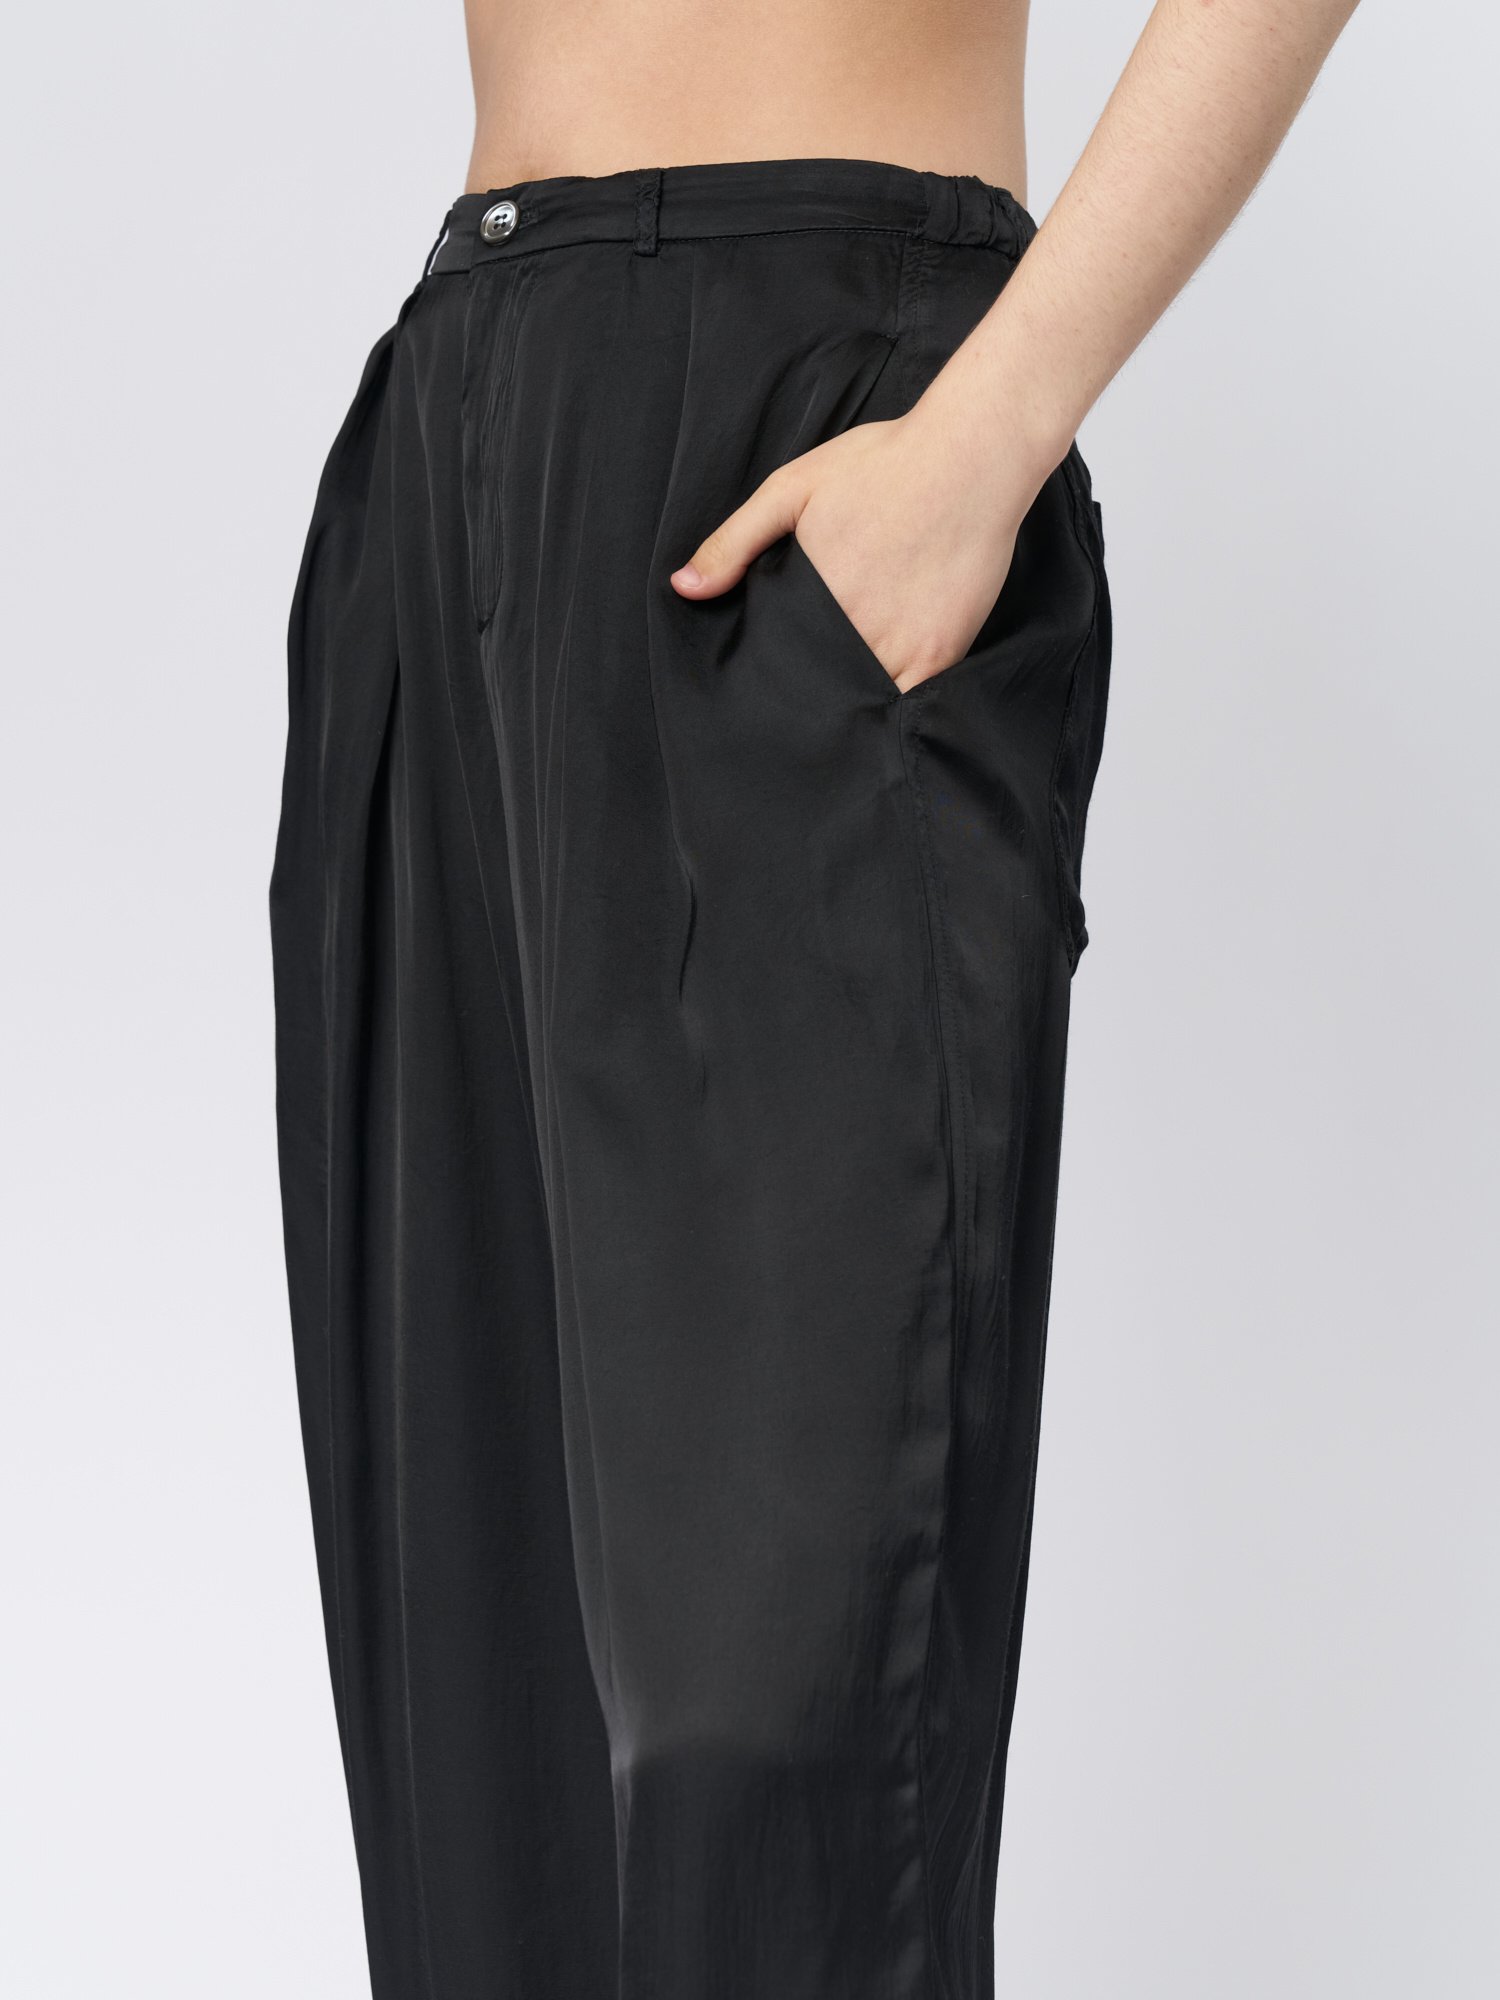 Topshop Tall tailored slim high waisted pleat pants in Black | ASOS